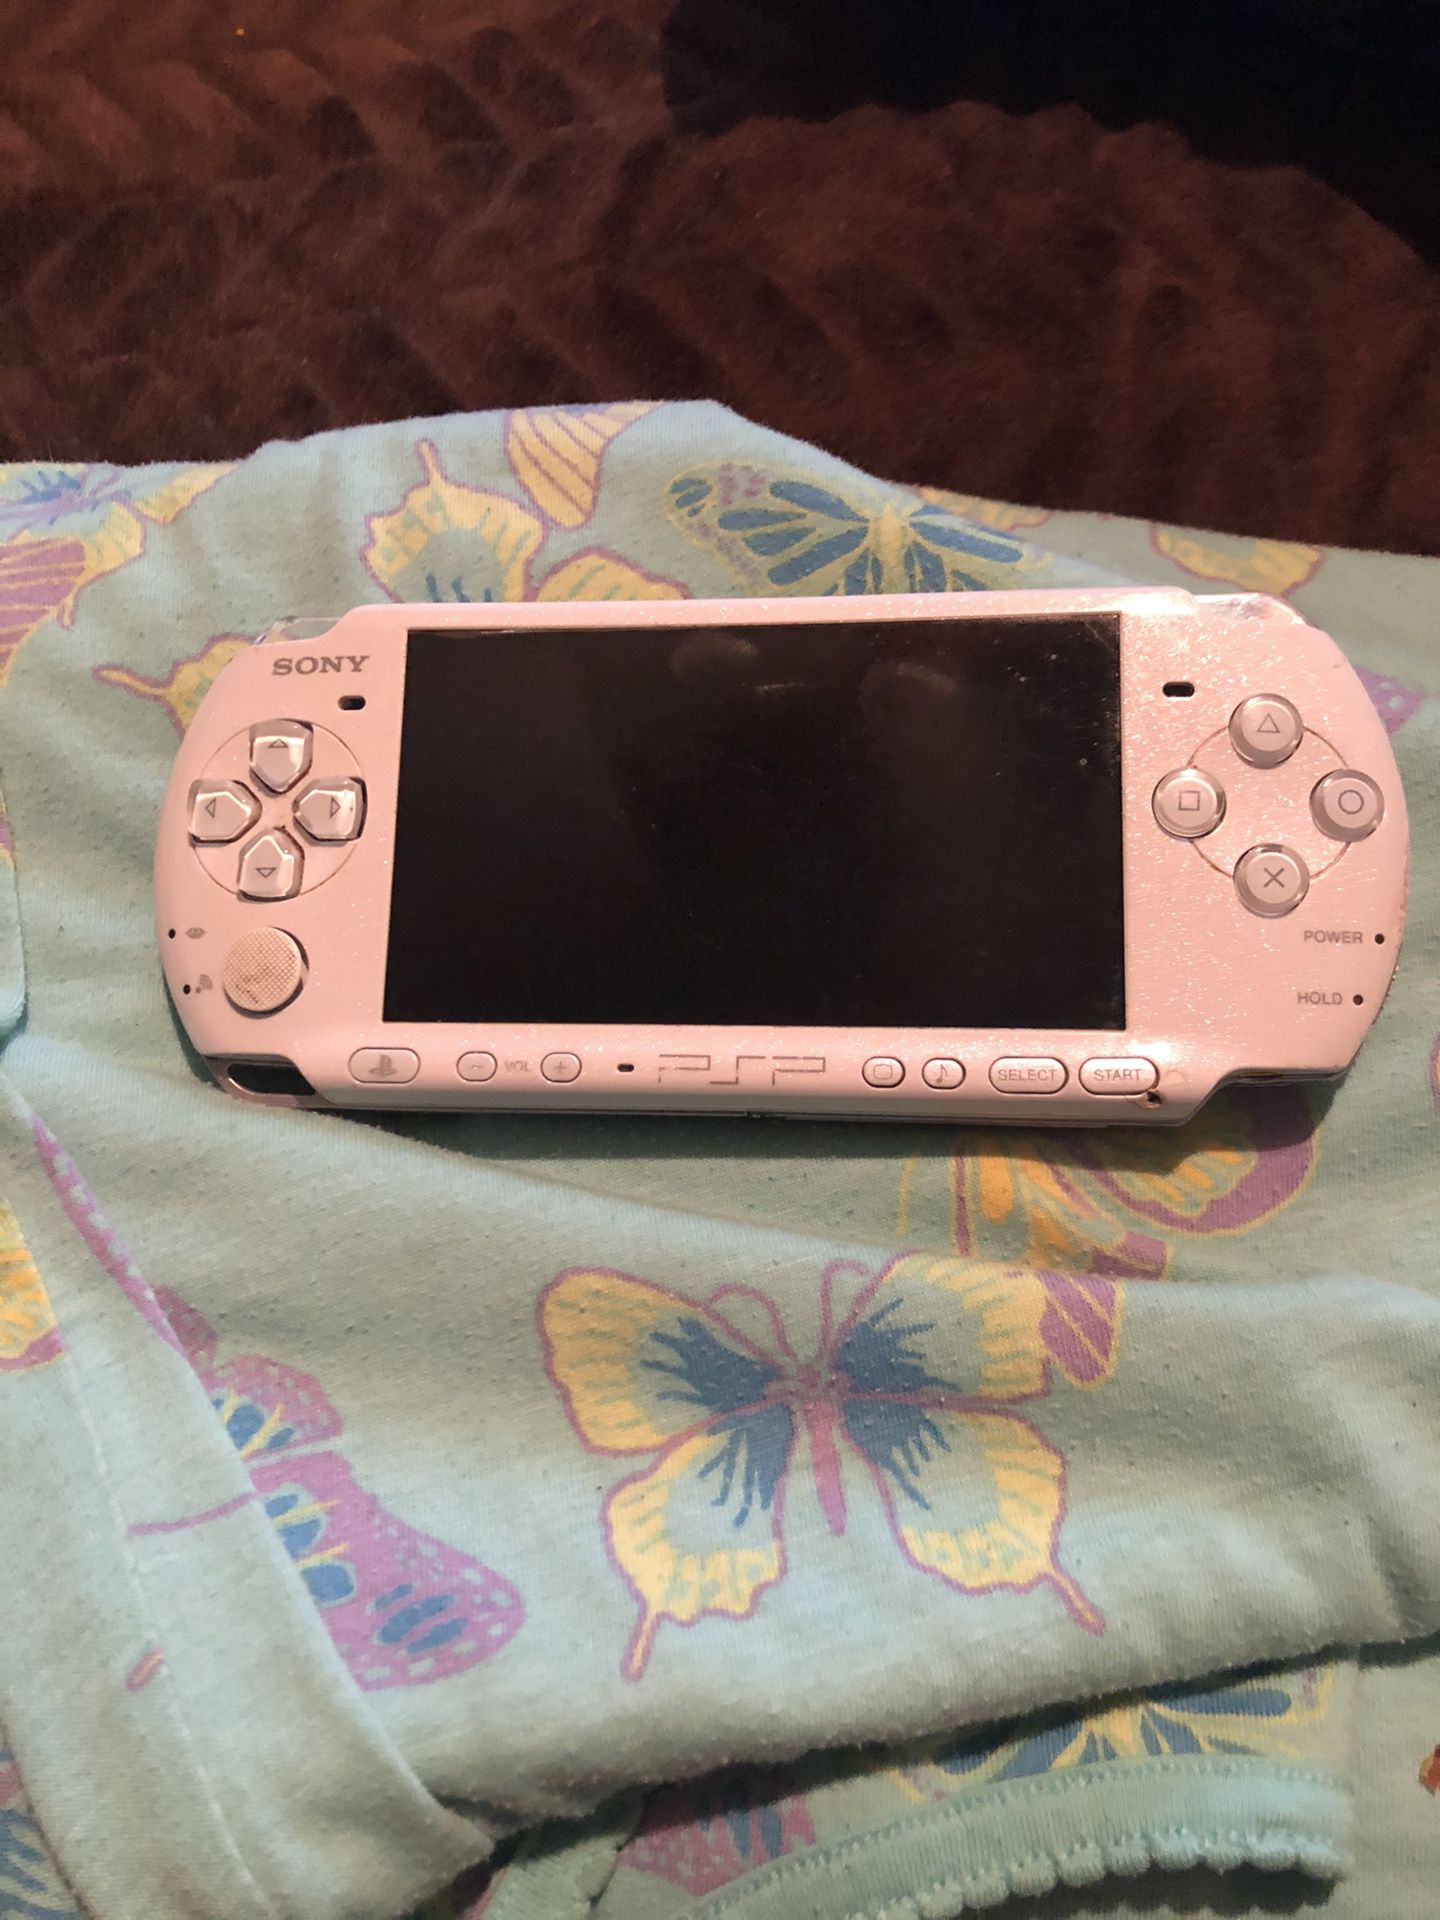 Sony psp with new battery, new charge cord and 9 games .